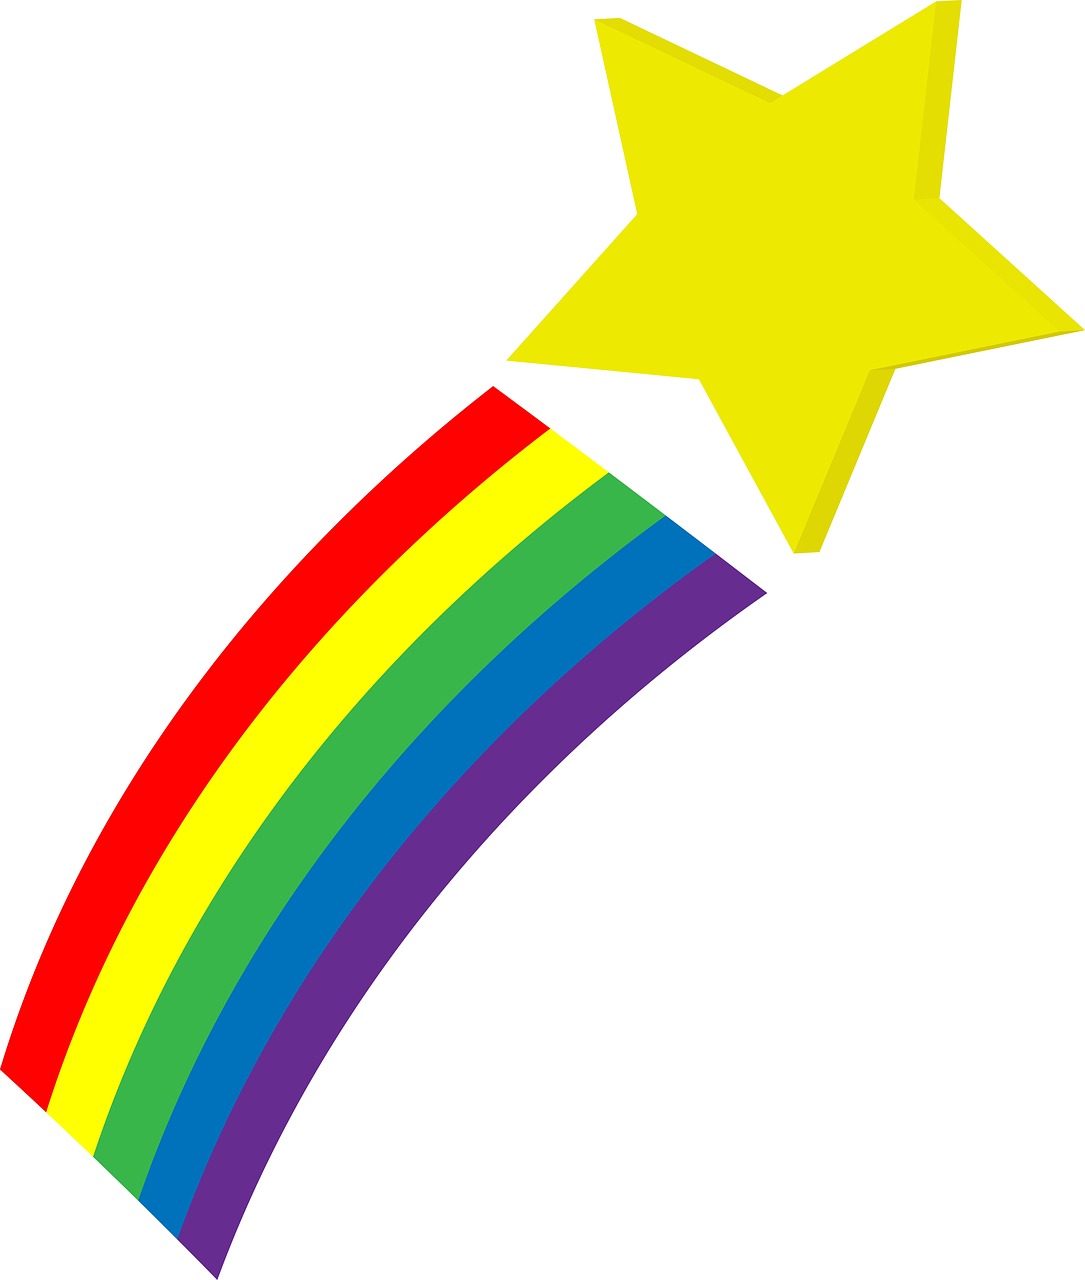 Course Image for WEL-STAR01 Wellbeing (Rainbow Stars)